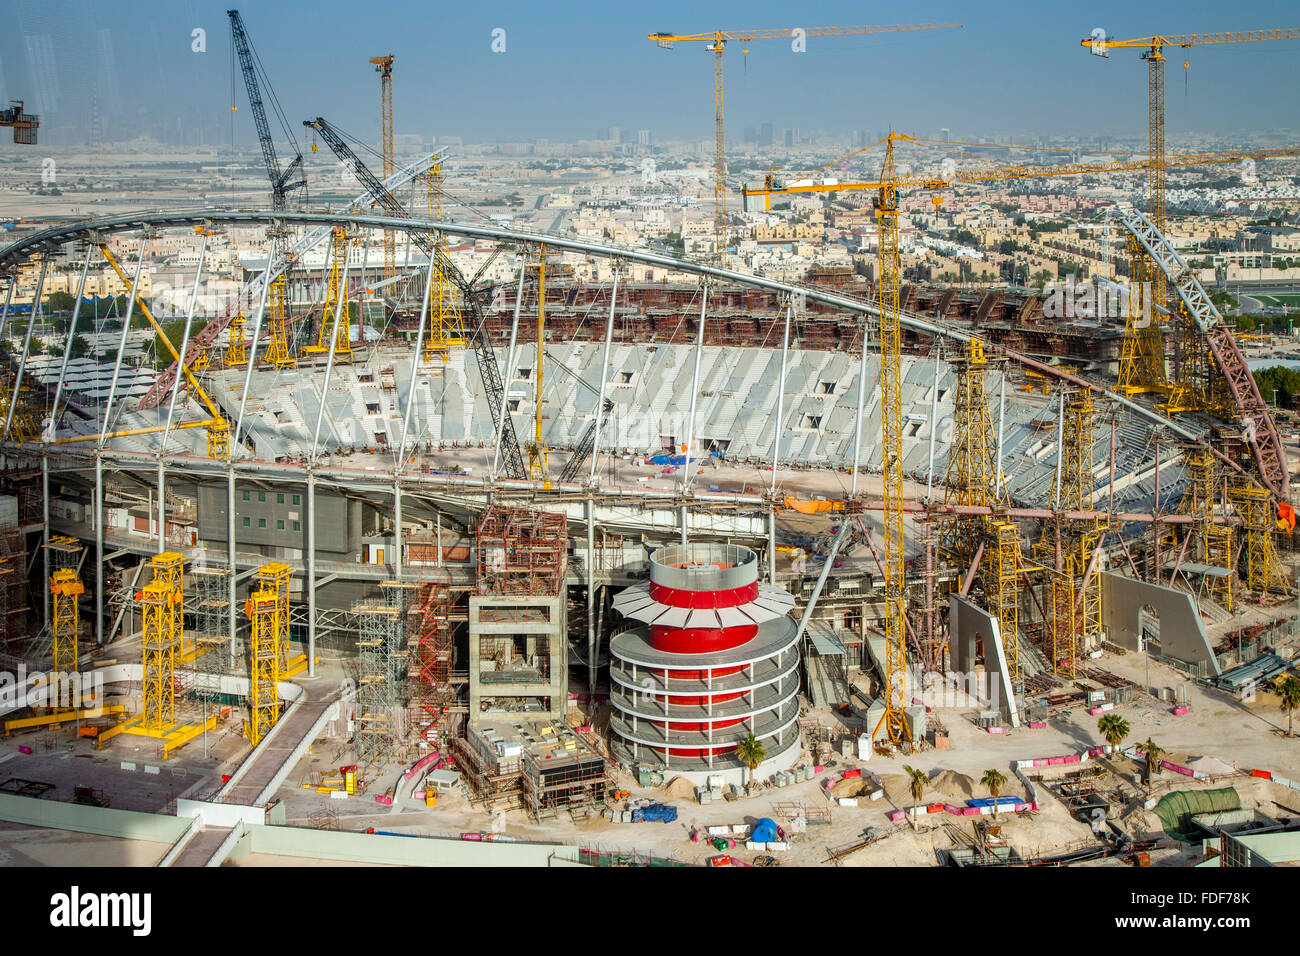 Stadiums Being Built For the 2022 Football World Cup, Doha, Qatar (Image Taken January 2016) Stock Photo